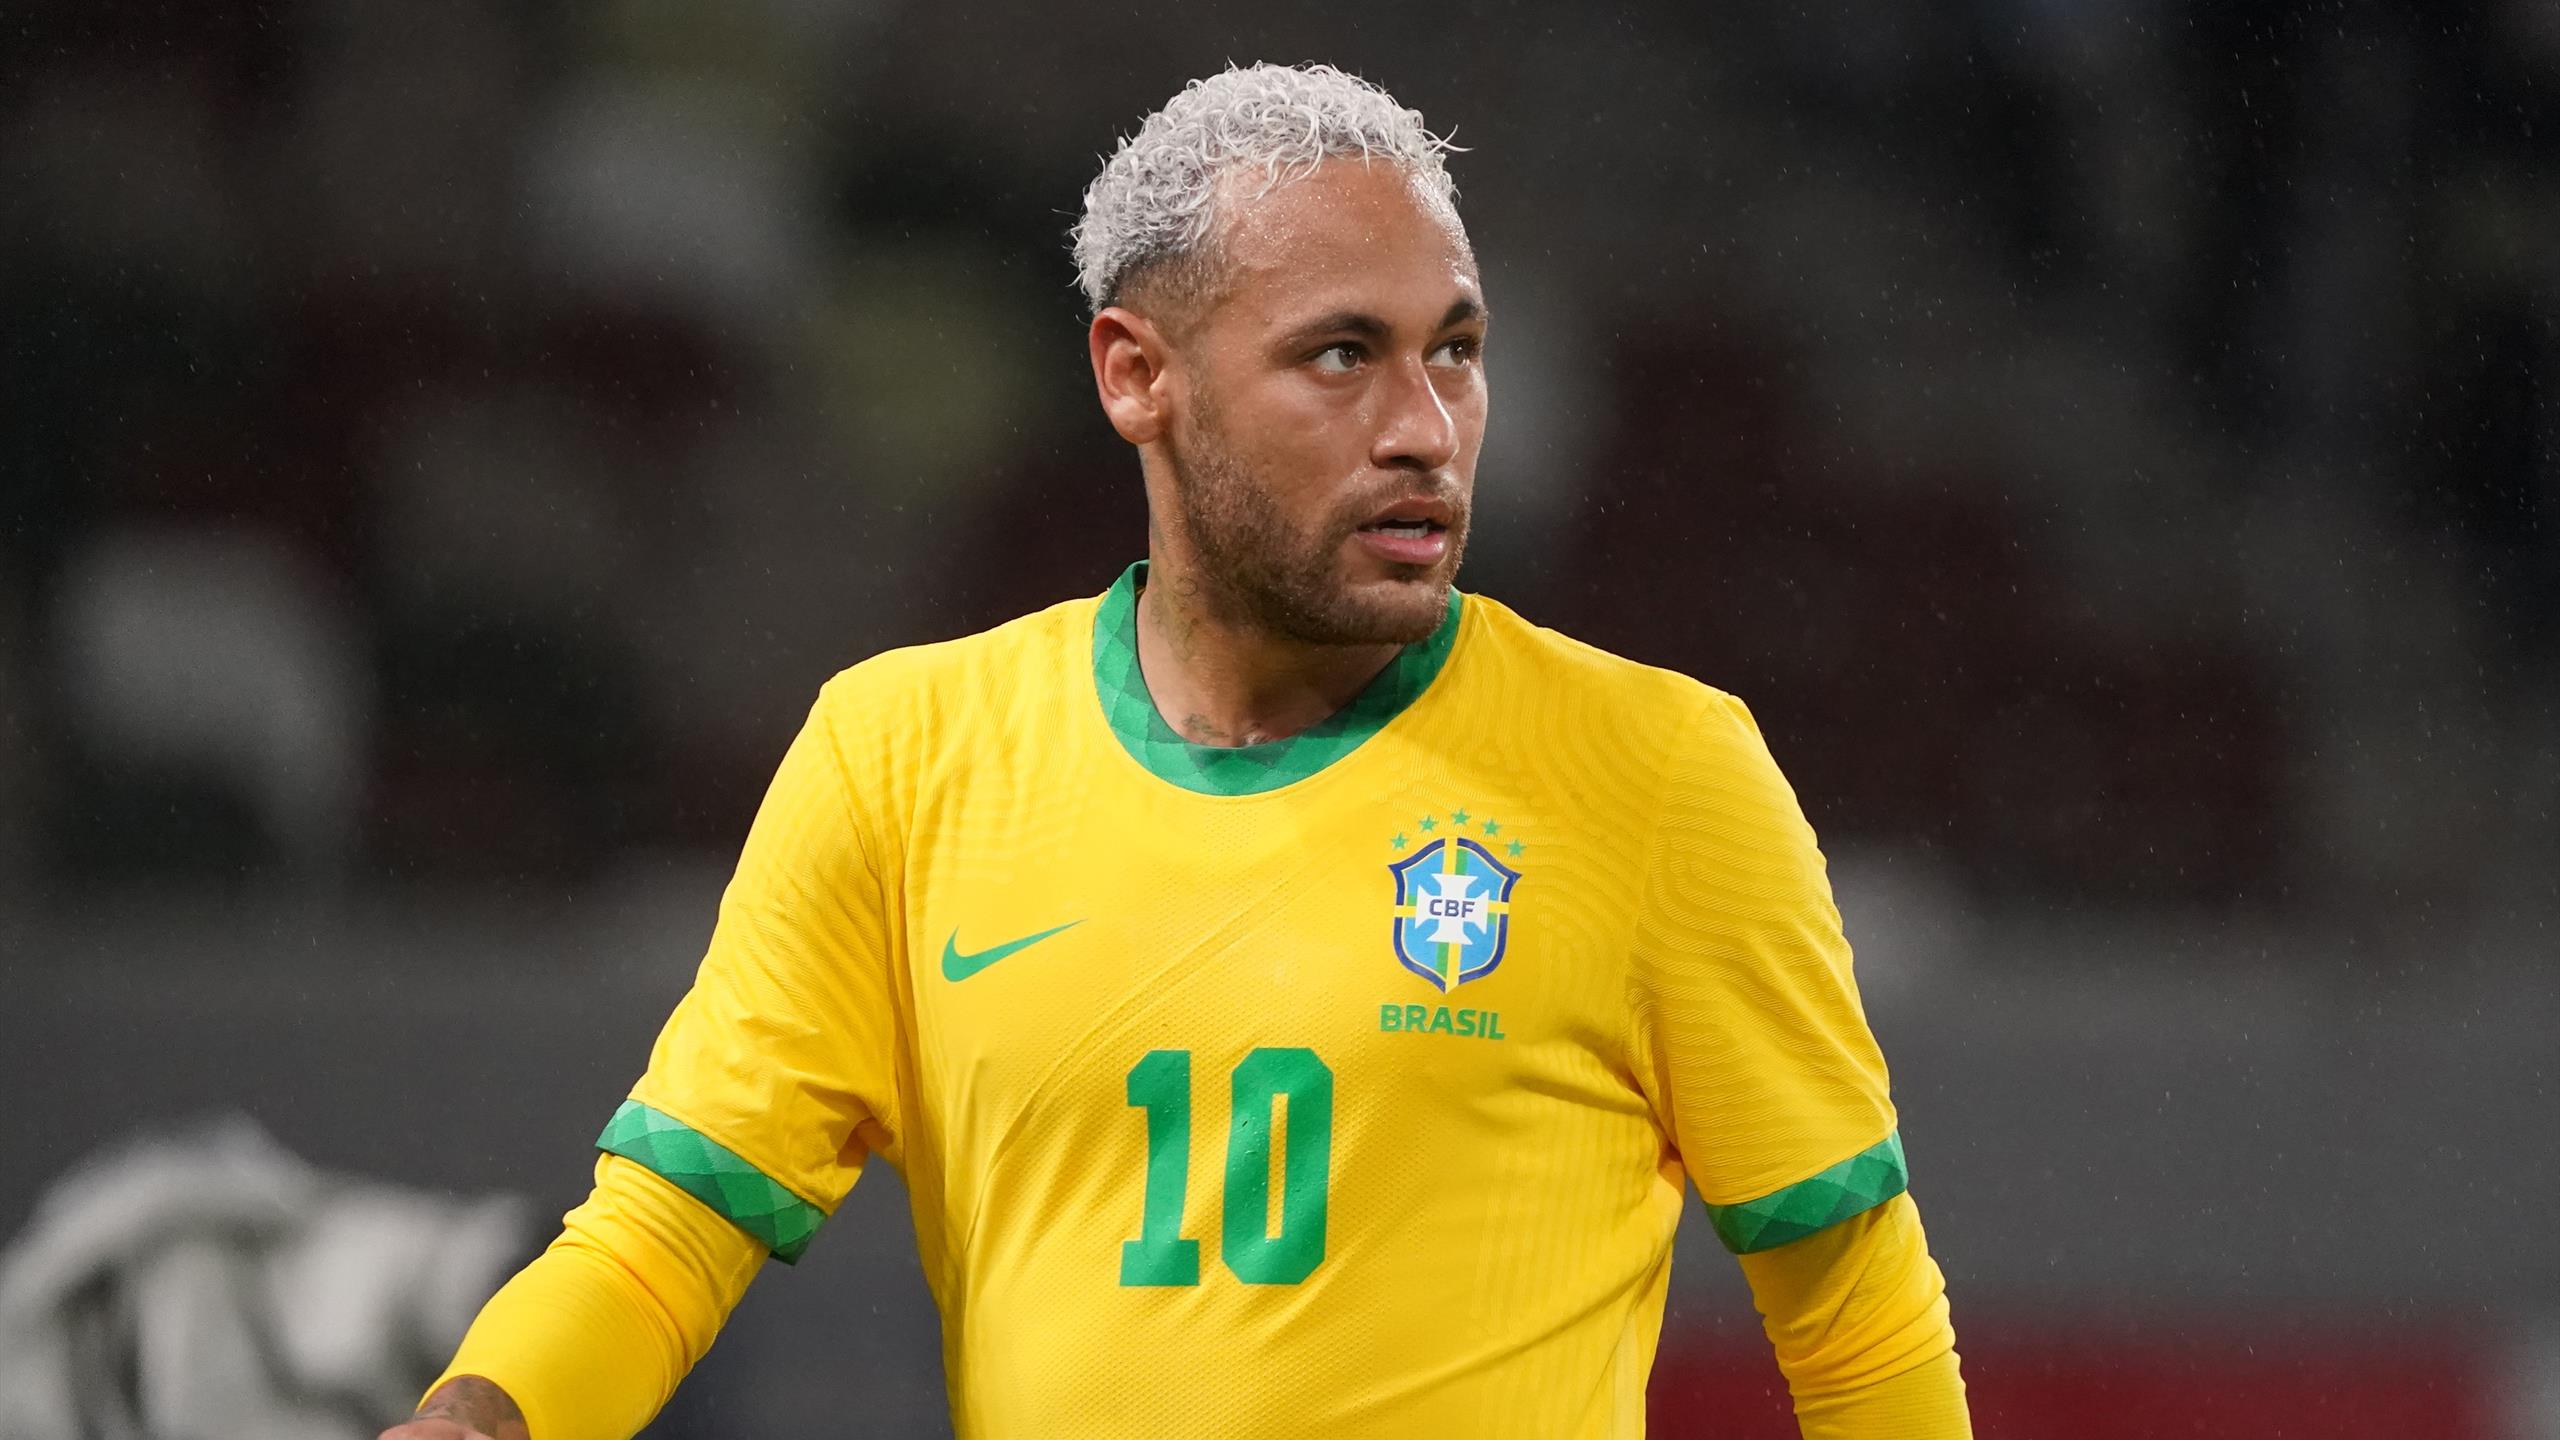 Neymar set to 'leave the national team' after the 2022 World Cup in Qatar amid reports of Brazil retirement